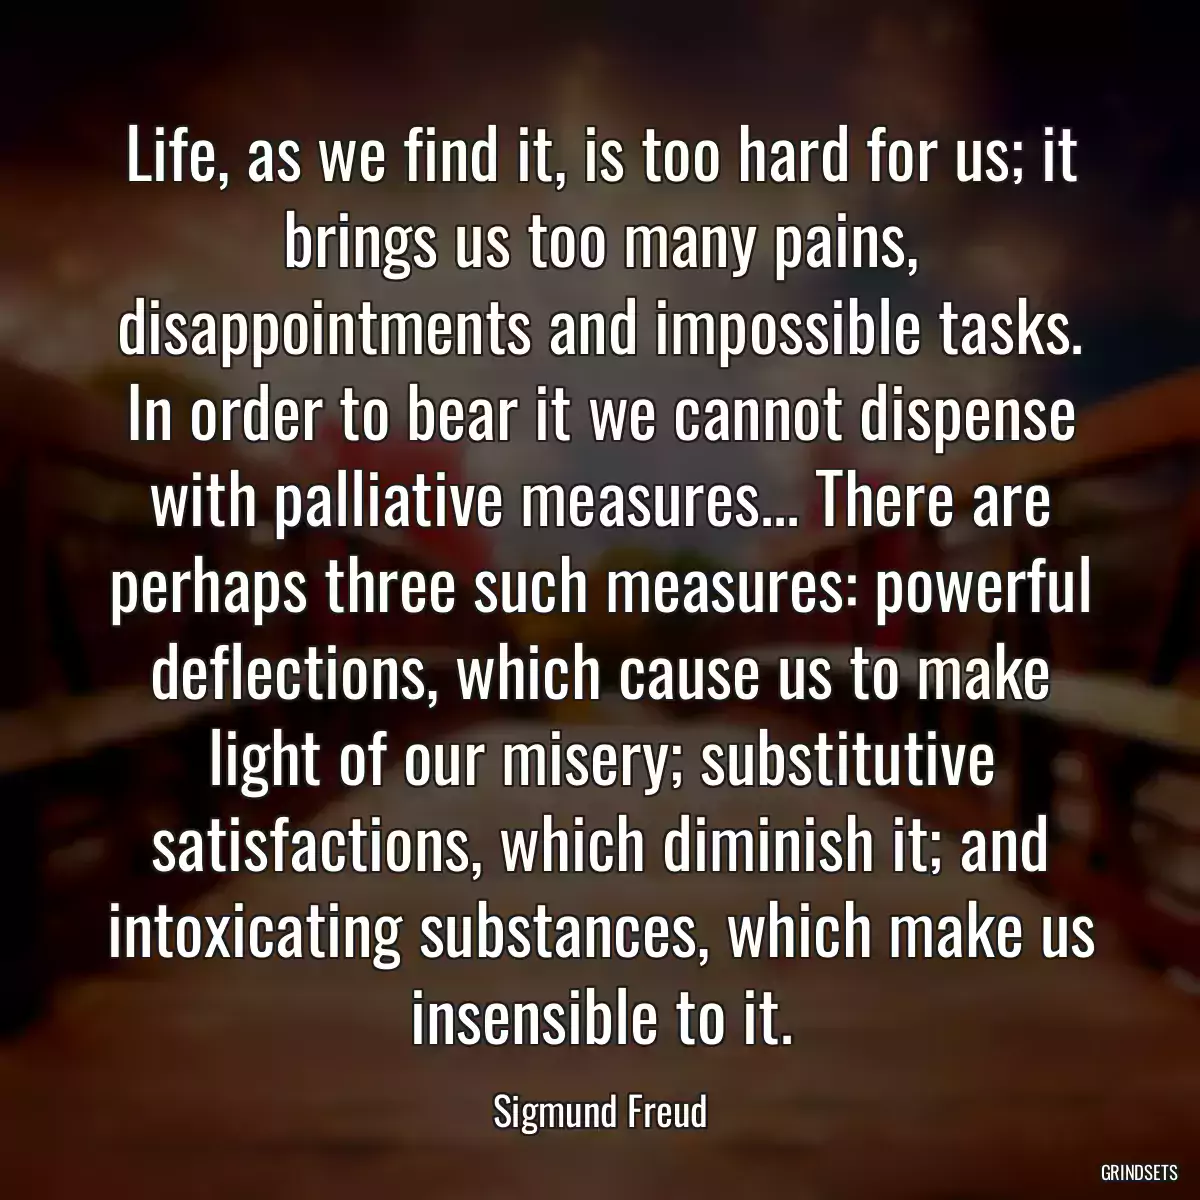 Life, as we find it, is too hard for us; it brings us too many pains, disappointments and impossible tasks. In order to bear it we cannot dispense with palliative measures... There are perhaps three such measures: powerful deflections, which cause us to make light of our misery; substitutive satisfactions, which diminish it; and intoxicating substances, which make us insensible to it.